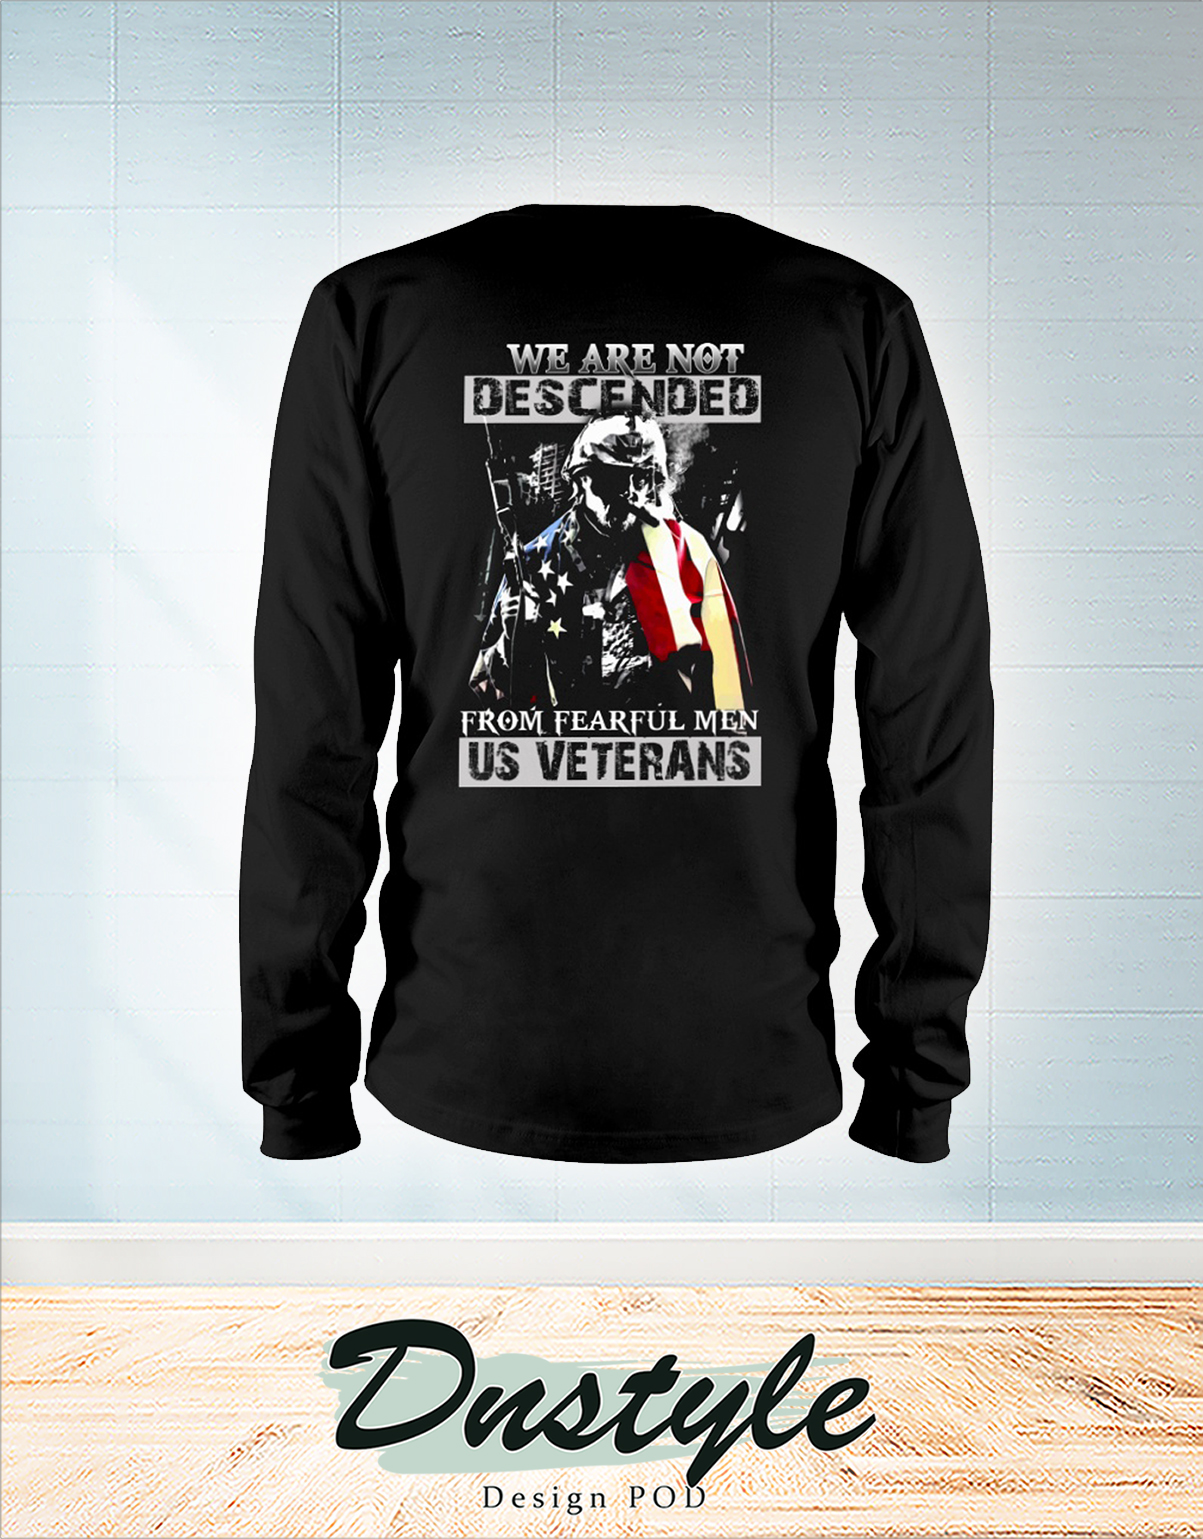 We are not descended from fearful men US veterans long sleeve